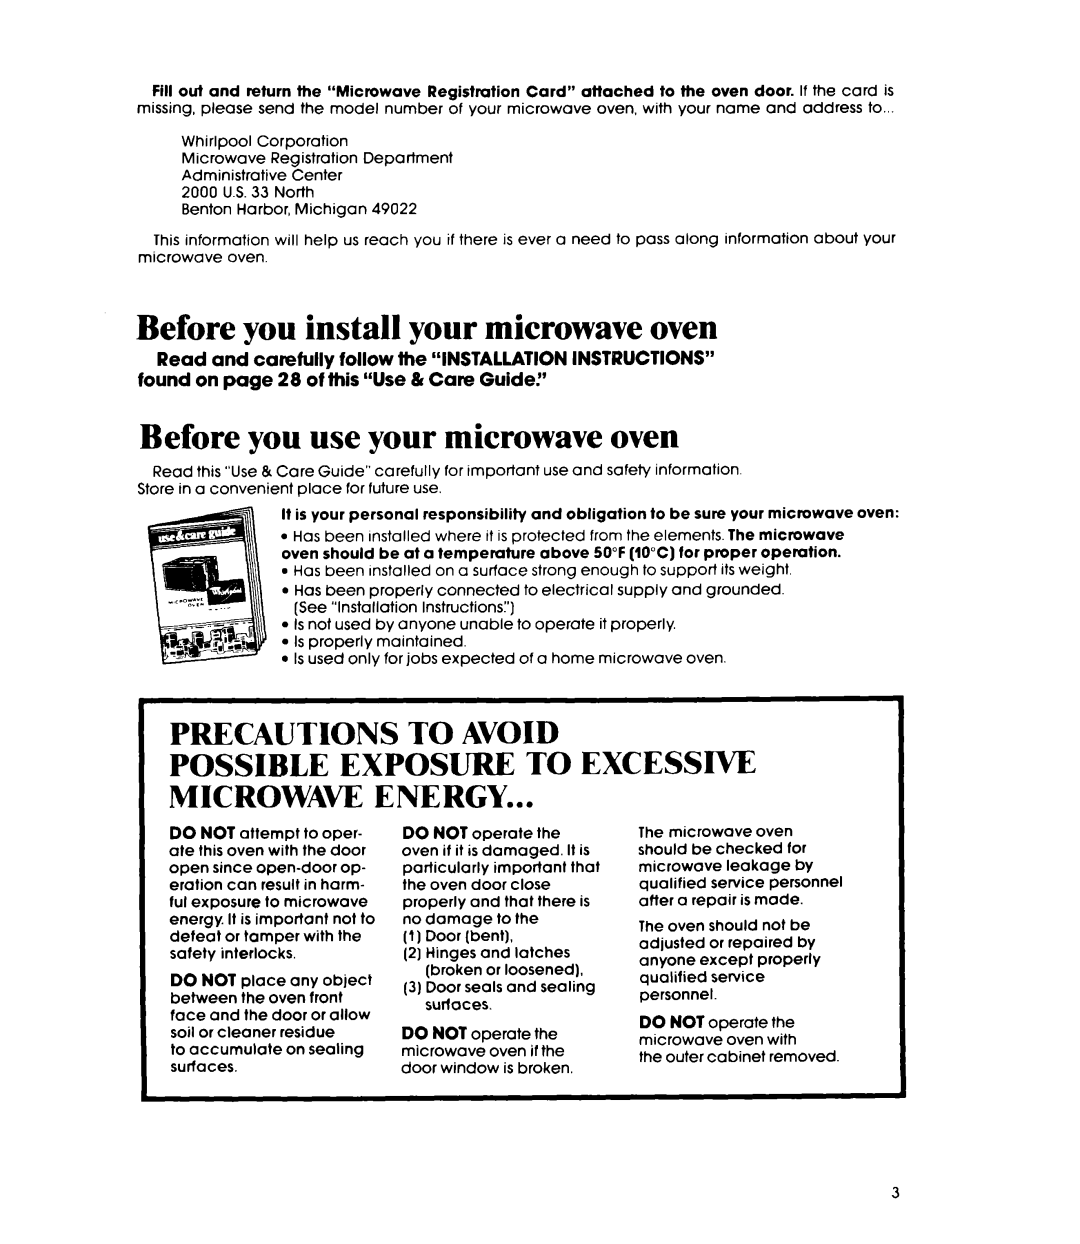 Whirlpool MW88OOXR manual Before you install your microwave oven, Before you use your microwave oven, Precautions To Avoid 